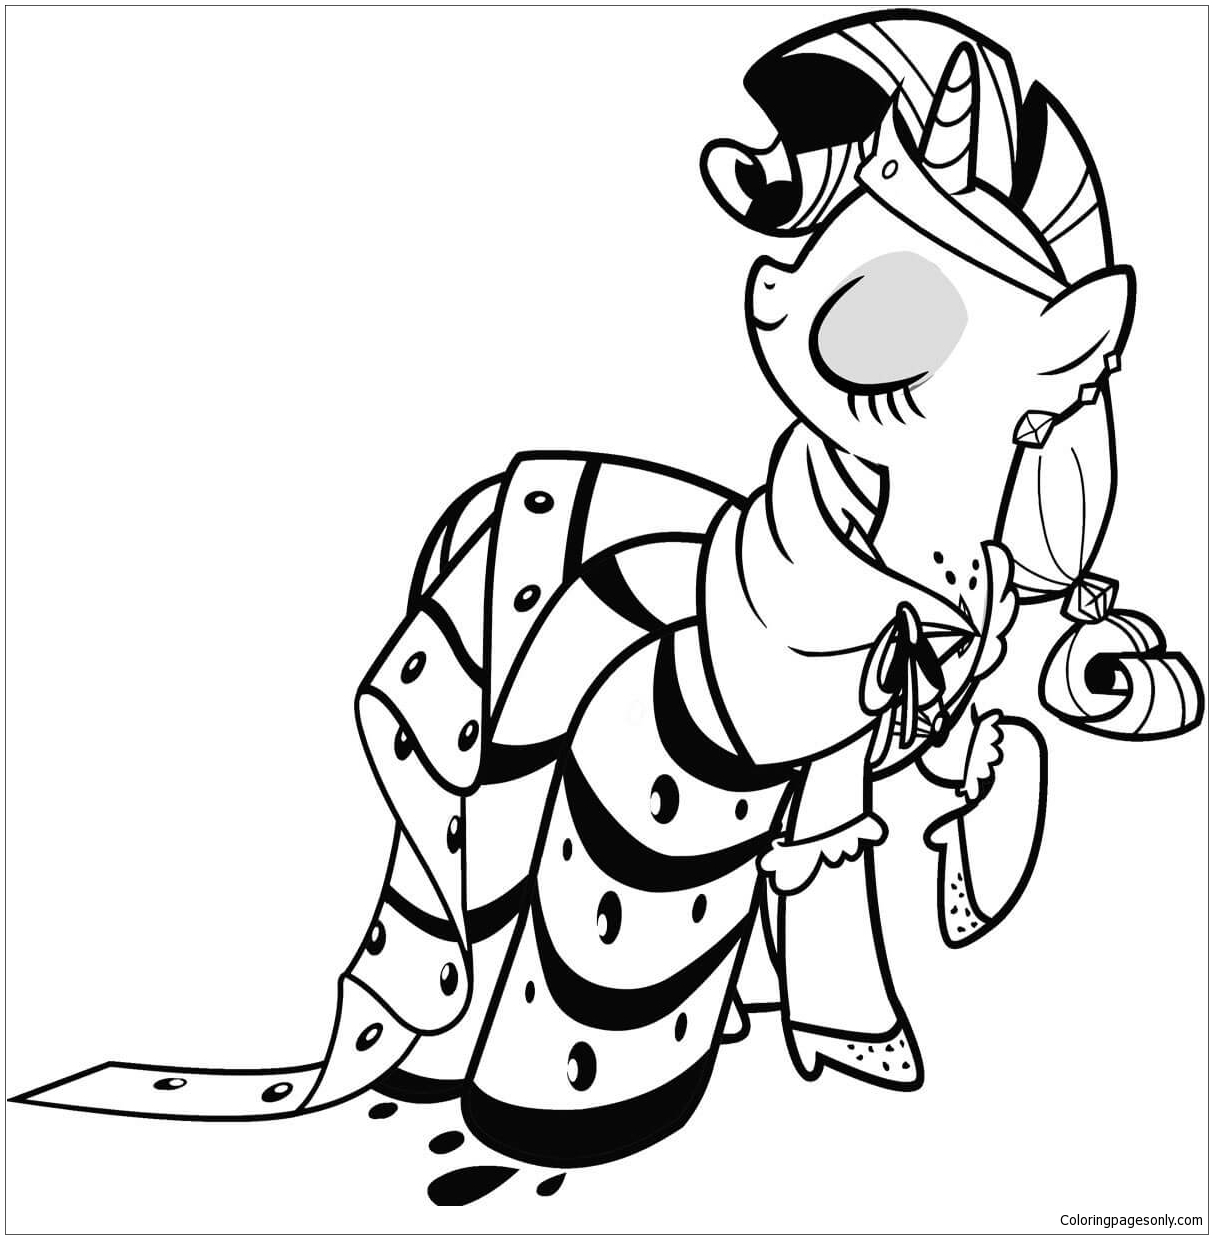 My Little Pony love base Coloring Page